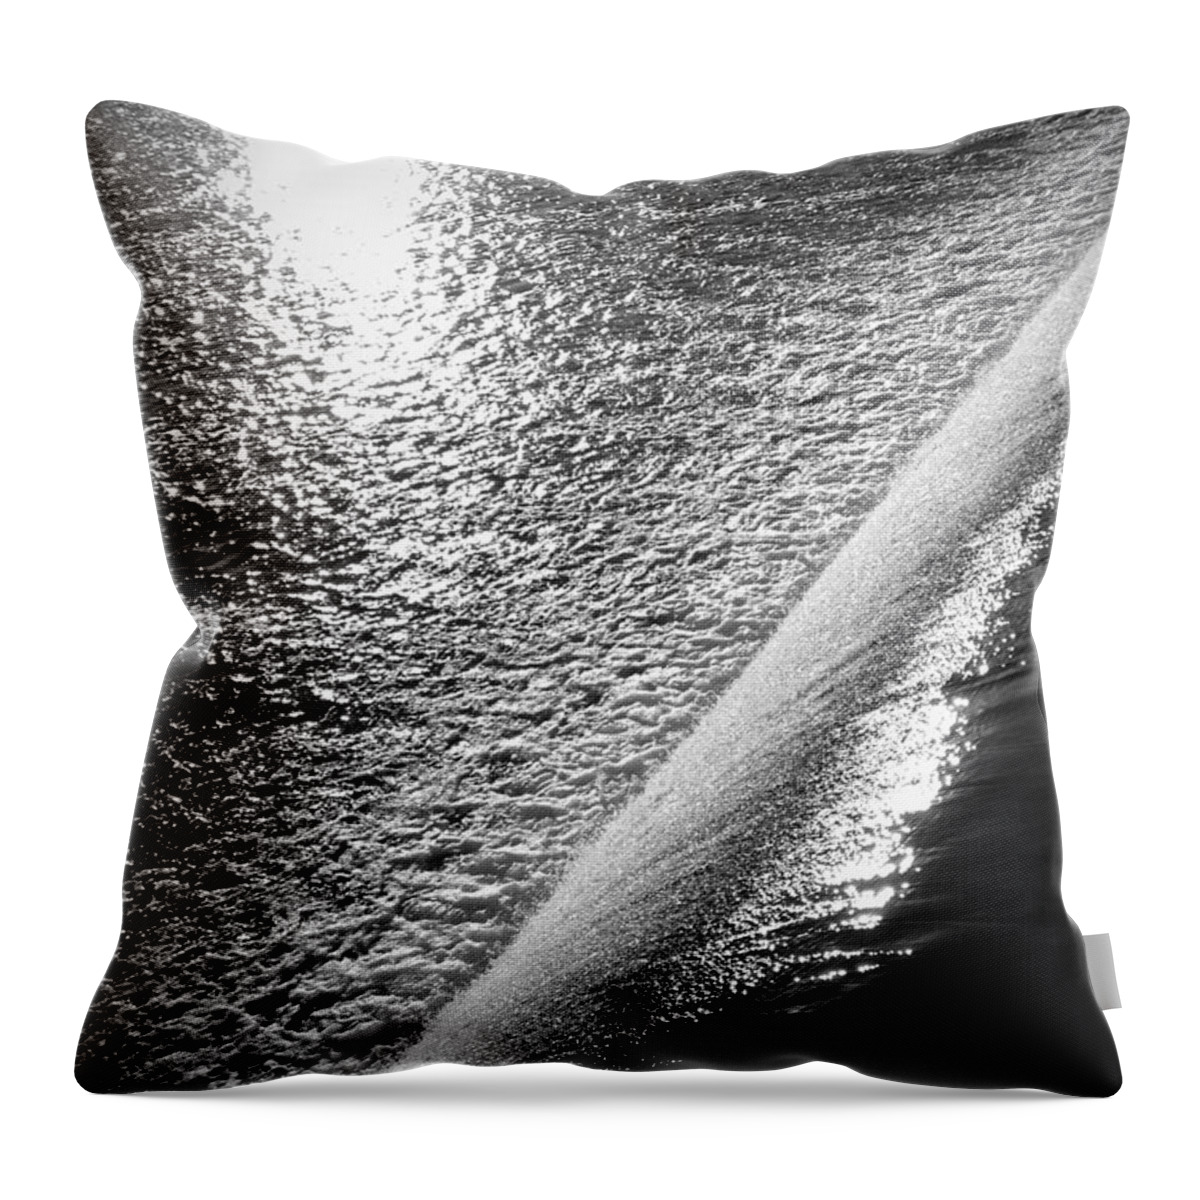 Philadelphia Throw Pillow featuring the photograph Water and Light by Photographic Arts And Design Studio